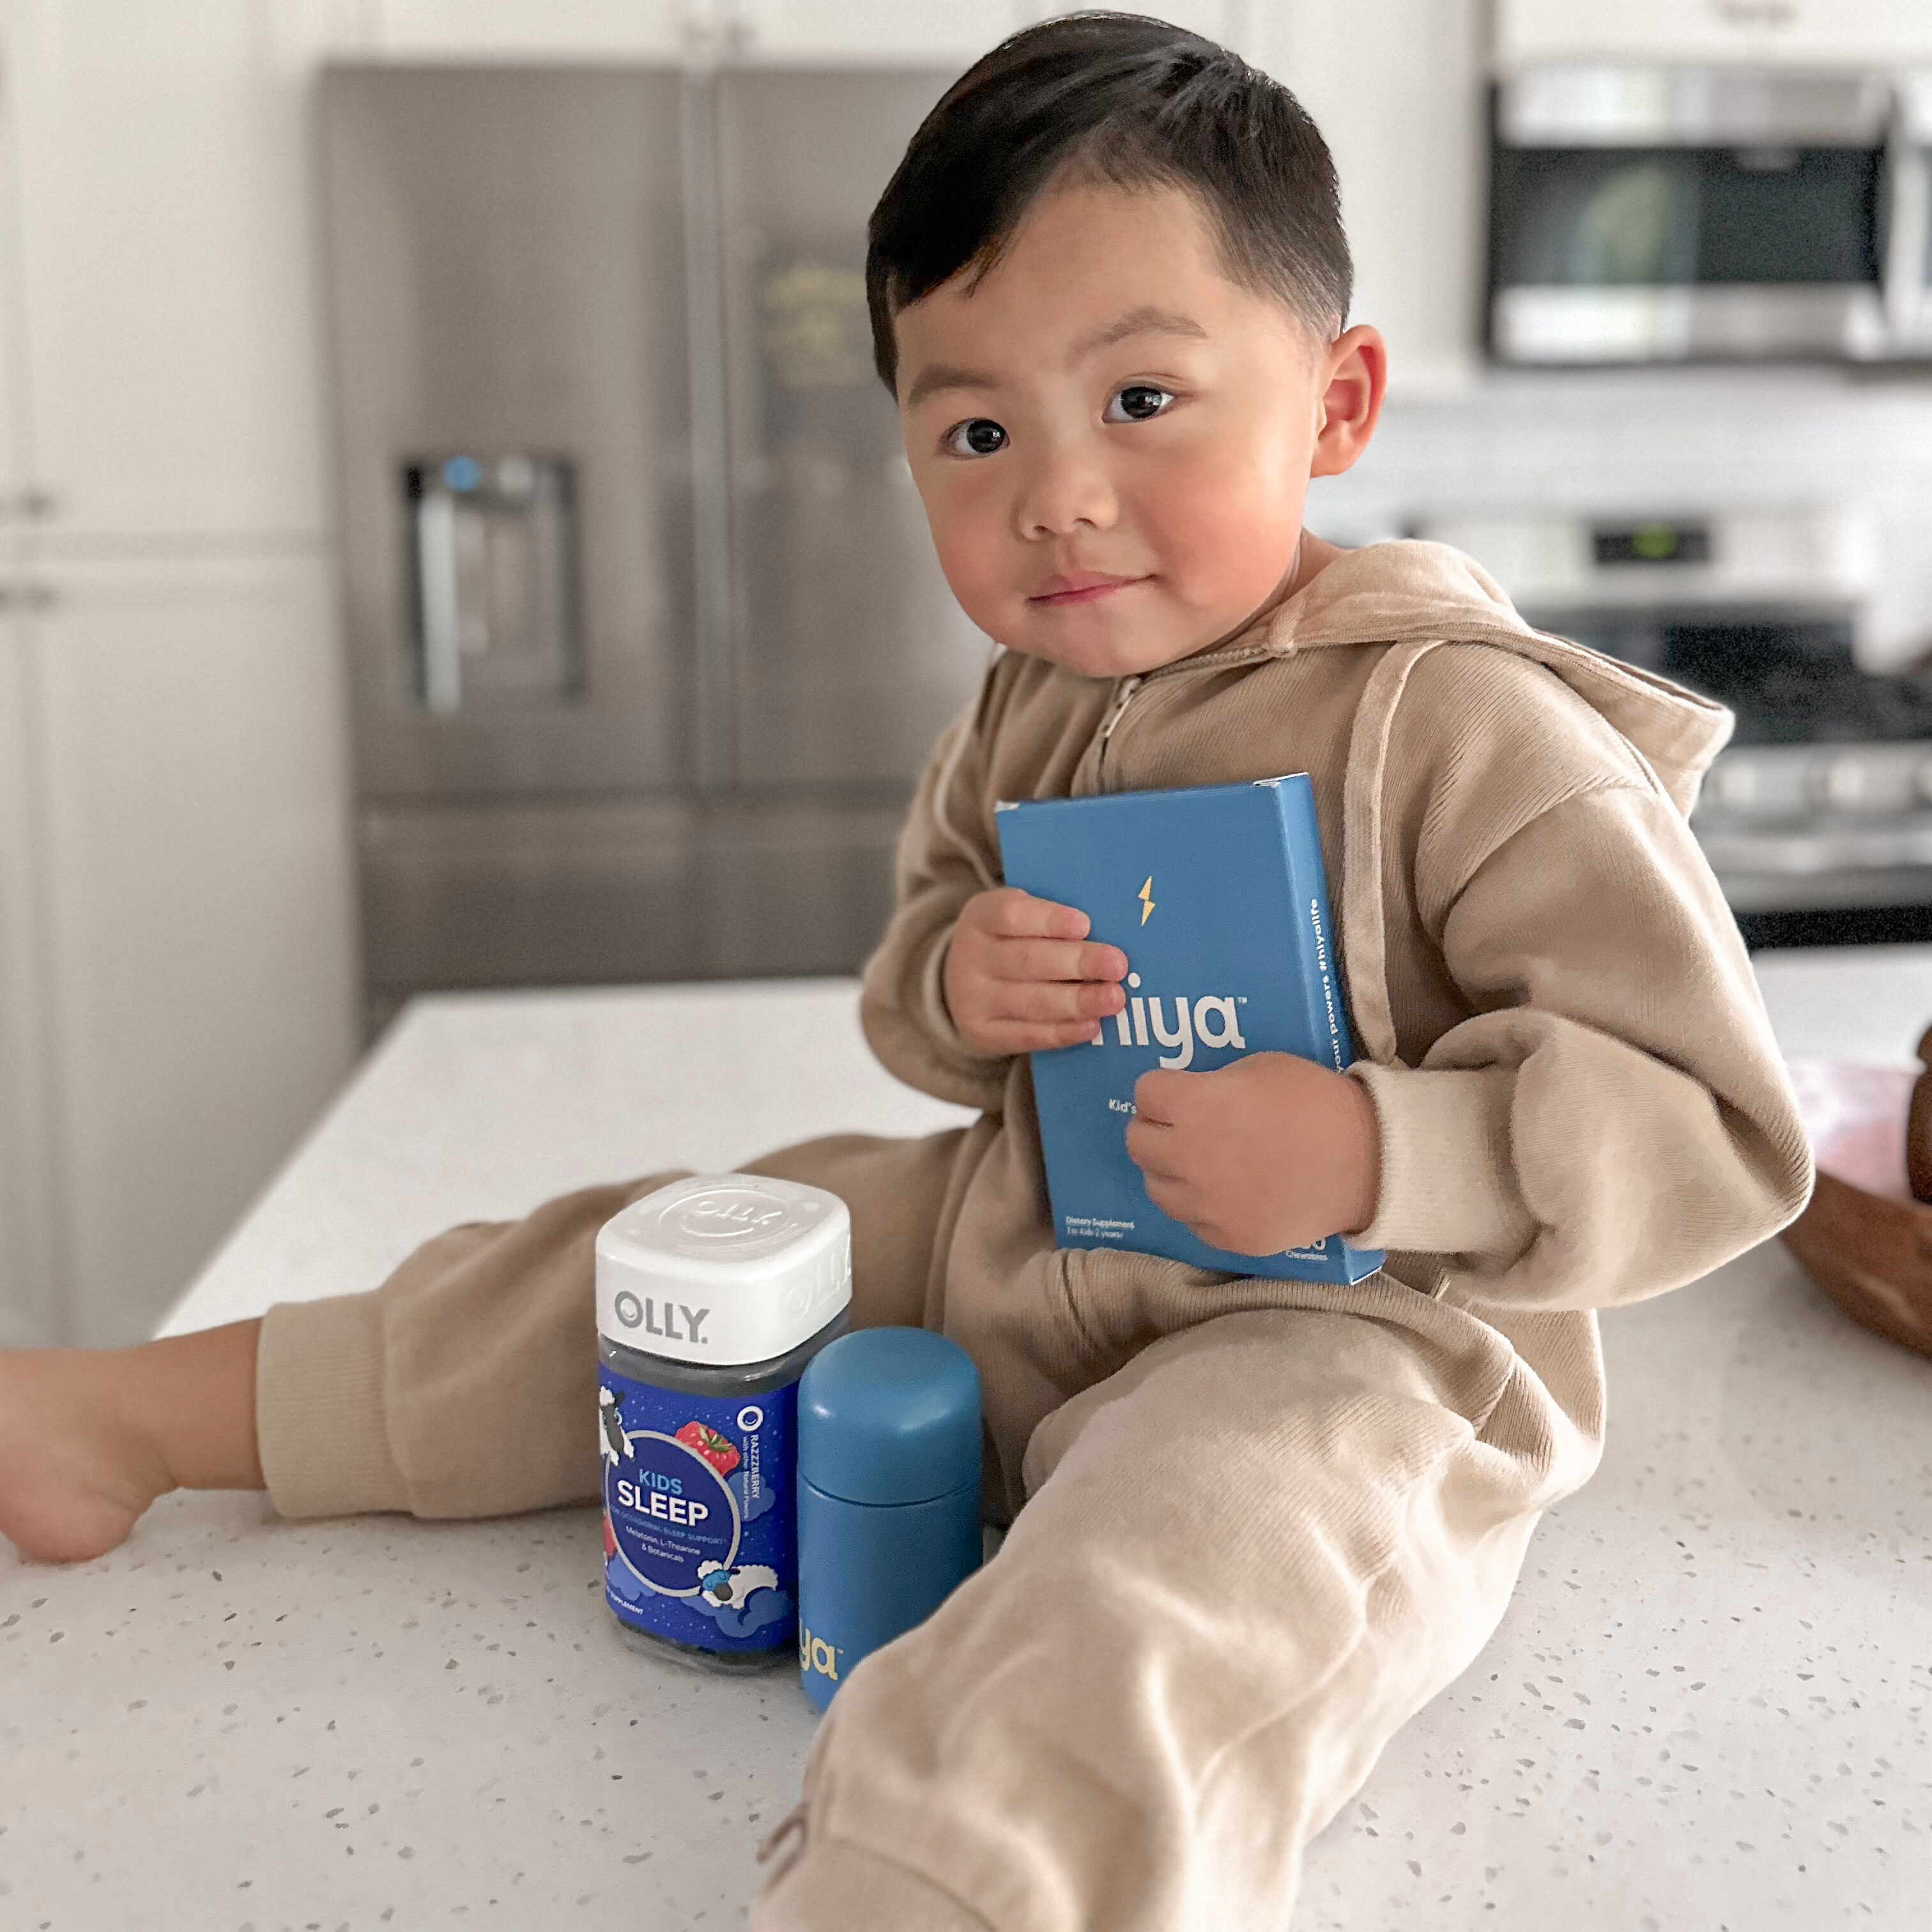 Hiya Kids Bedtime Essentials vs. OLLY Kids Sleep: Here’s the Nighttime Supplement I Trust Most